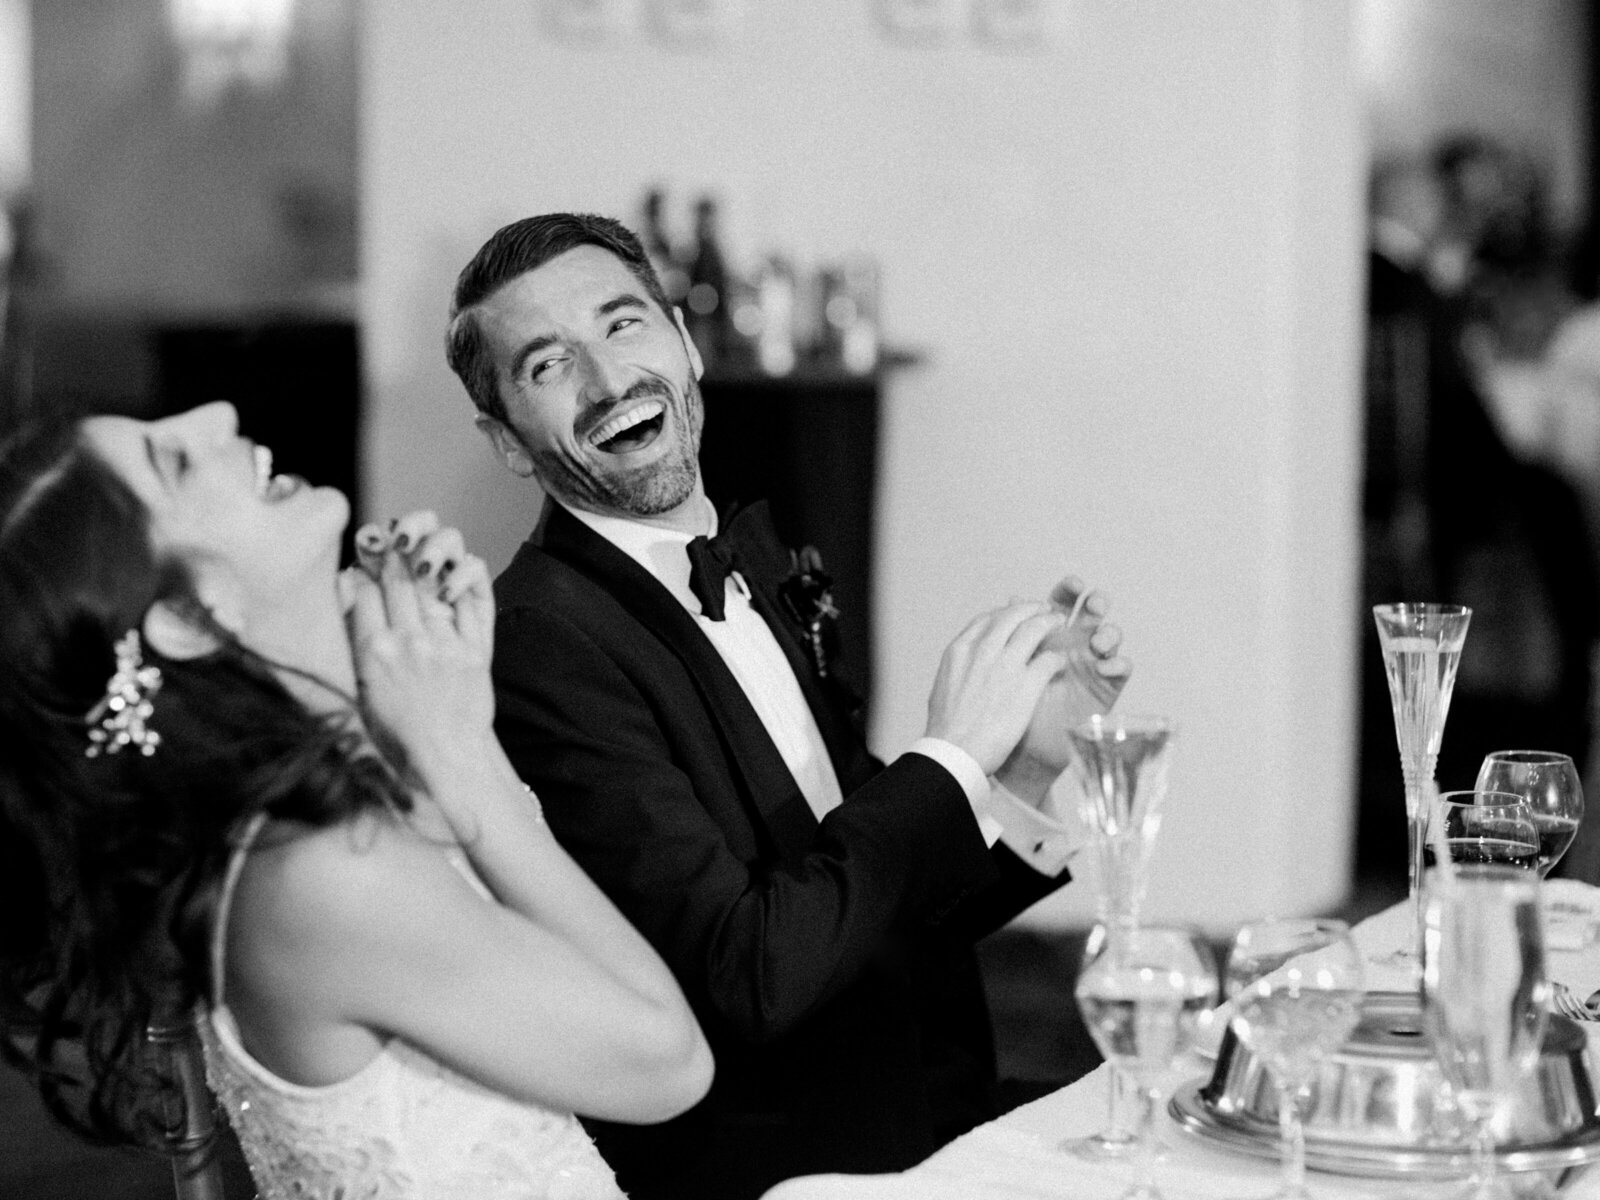 083-For-the-Love-of-It-Bride-and-Groom-Laughing